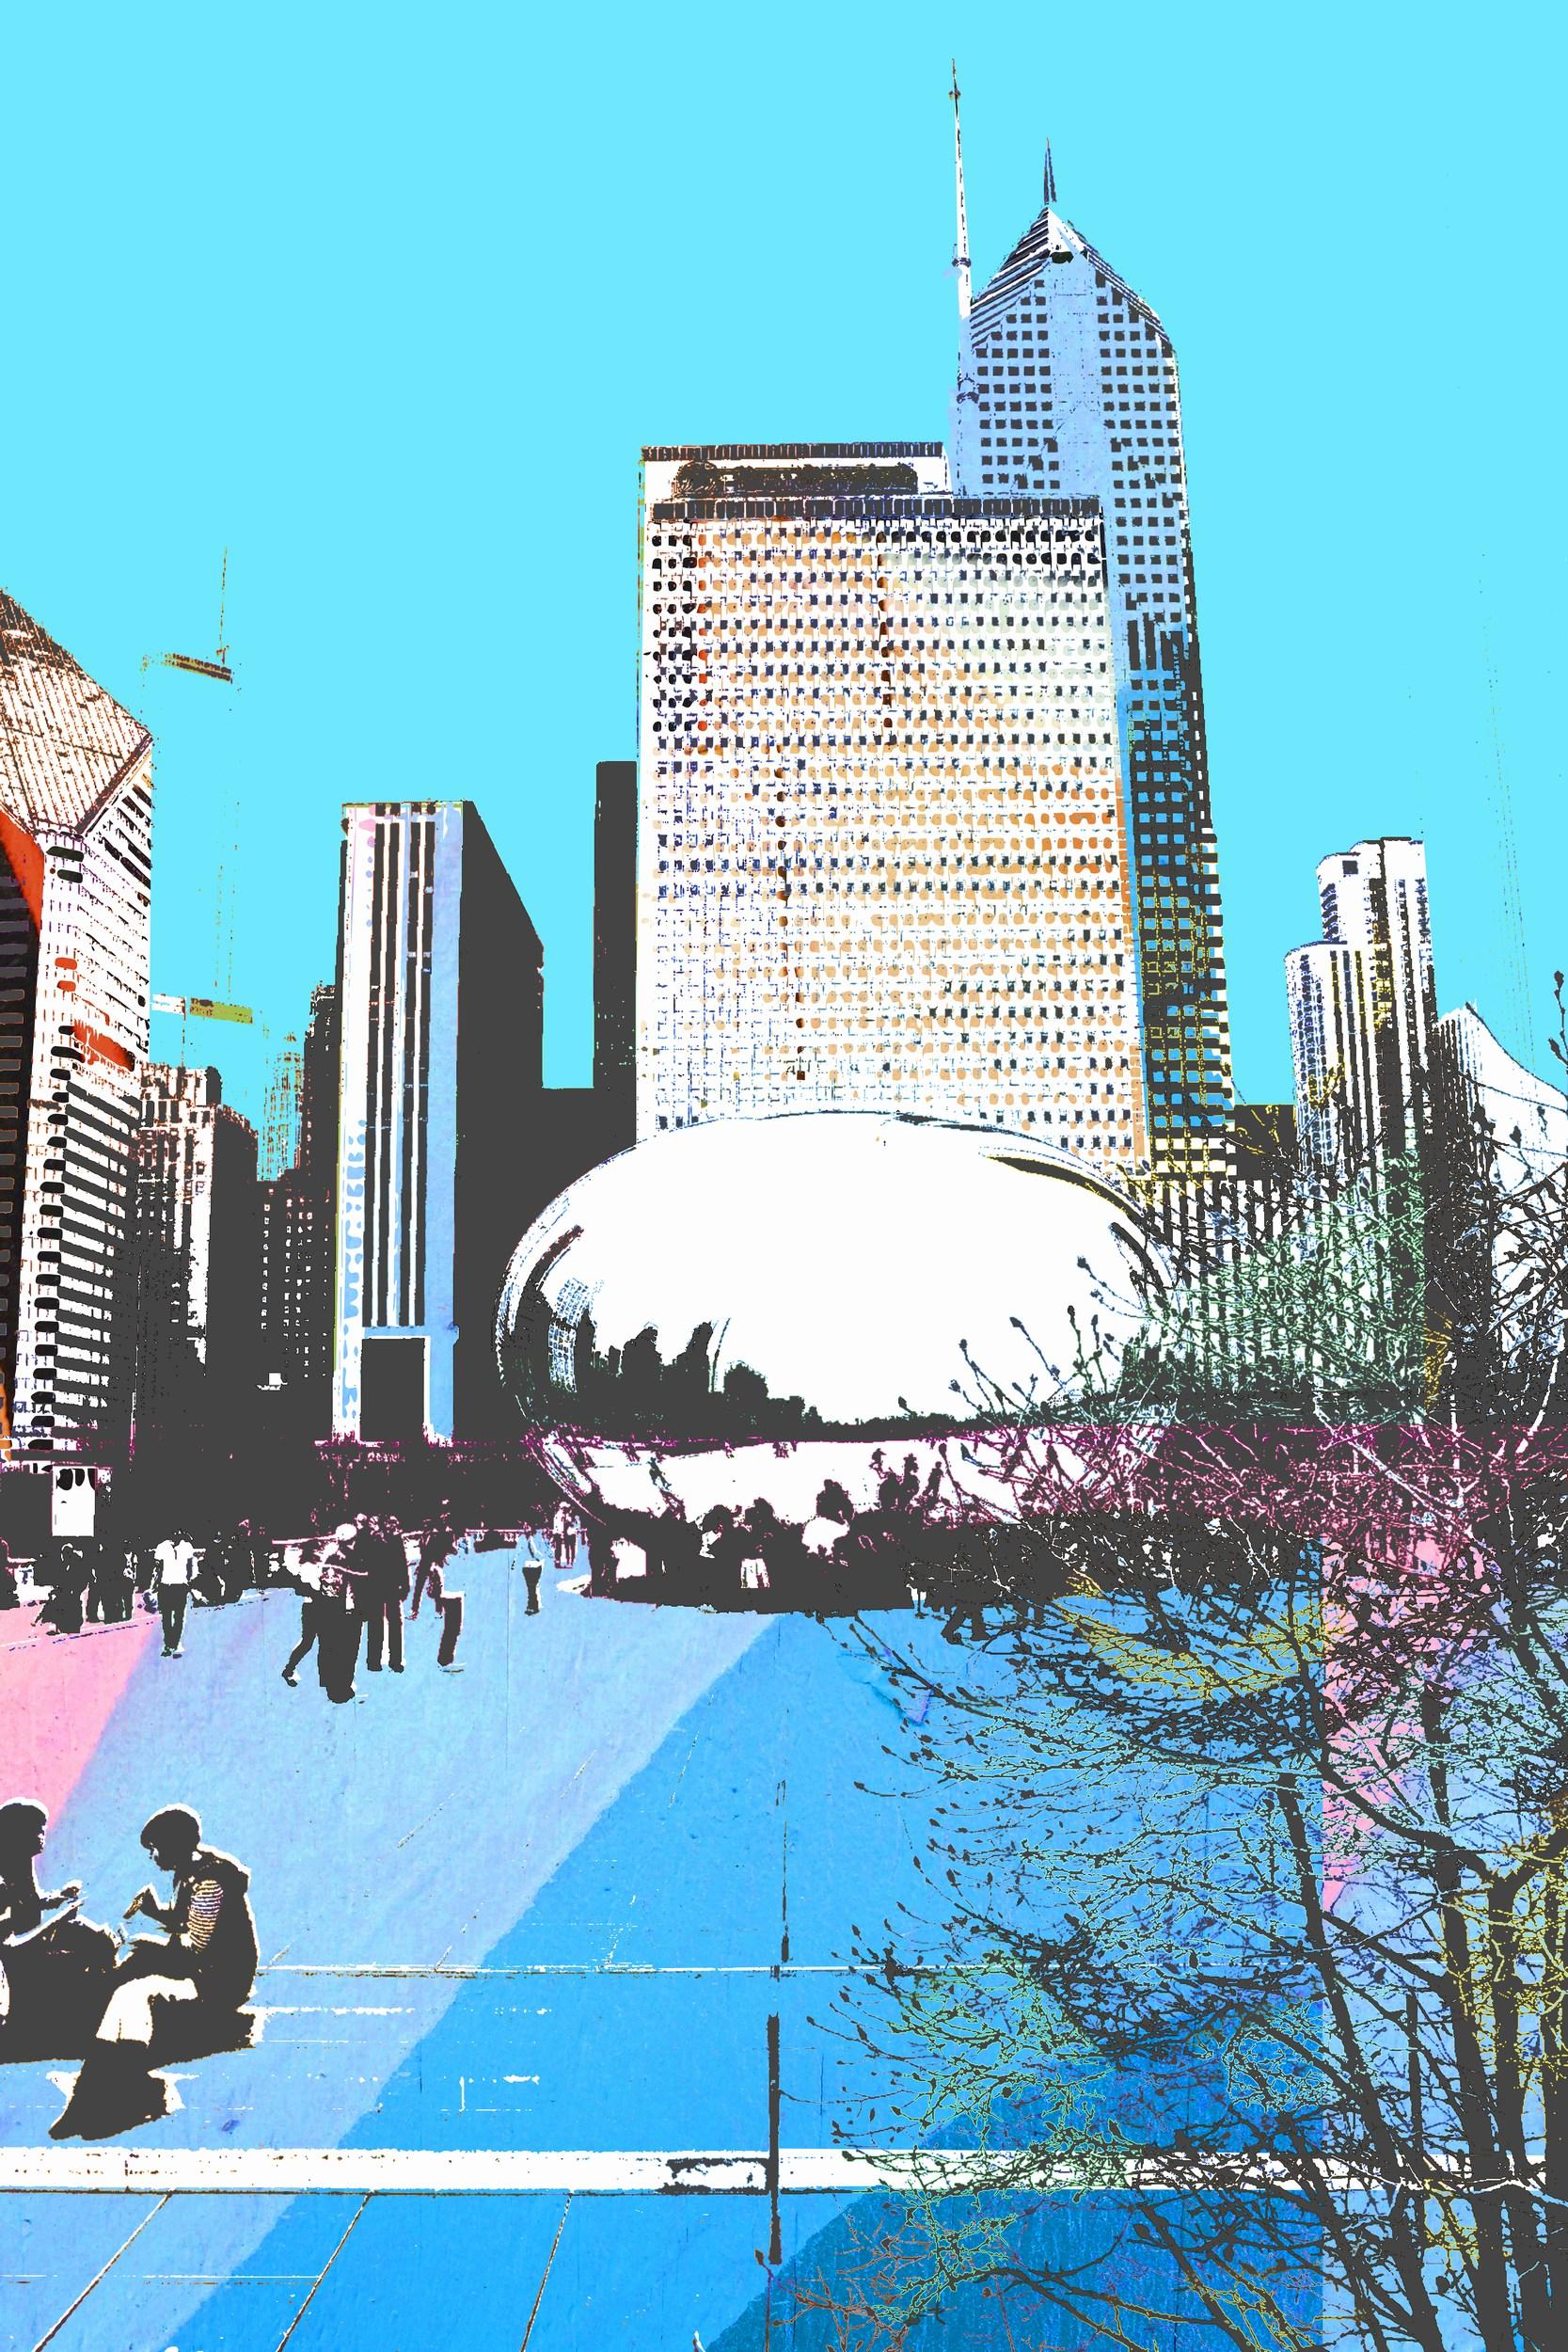 Katrina Revenaugh
“Reflections of Chicago”
Dye Sublimation Print on Aluminum, 2024
Size Options: 12 x 18 inches, 24 x 36 inches
Color Options: Blue, Coral, Green, Pink, Yellow or Purple
Edition: 75 + AP
Signed and titled on label provided